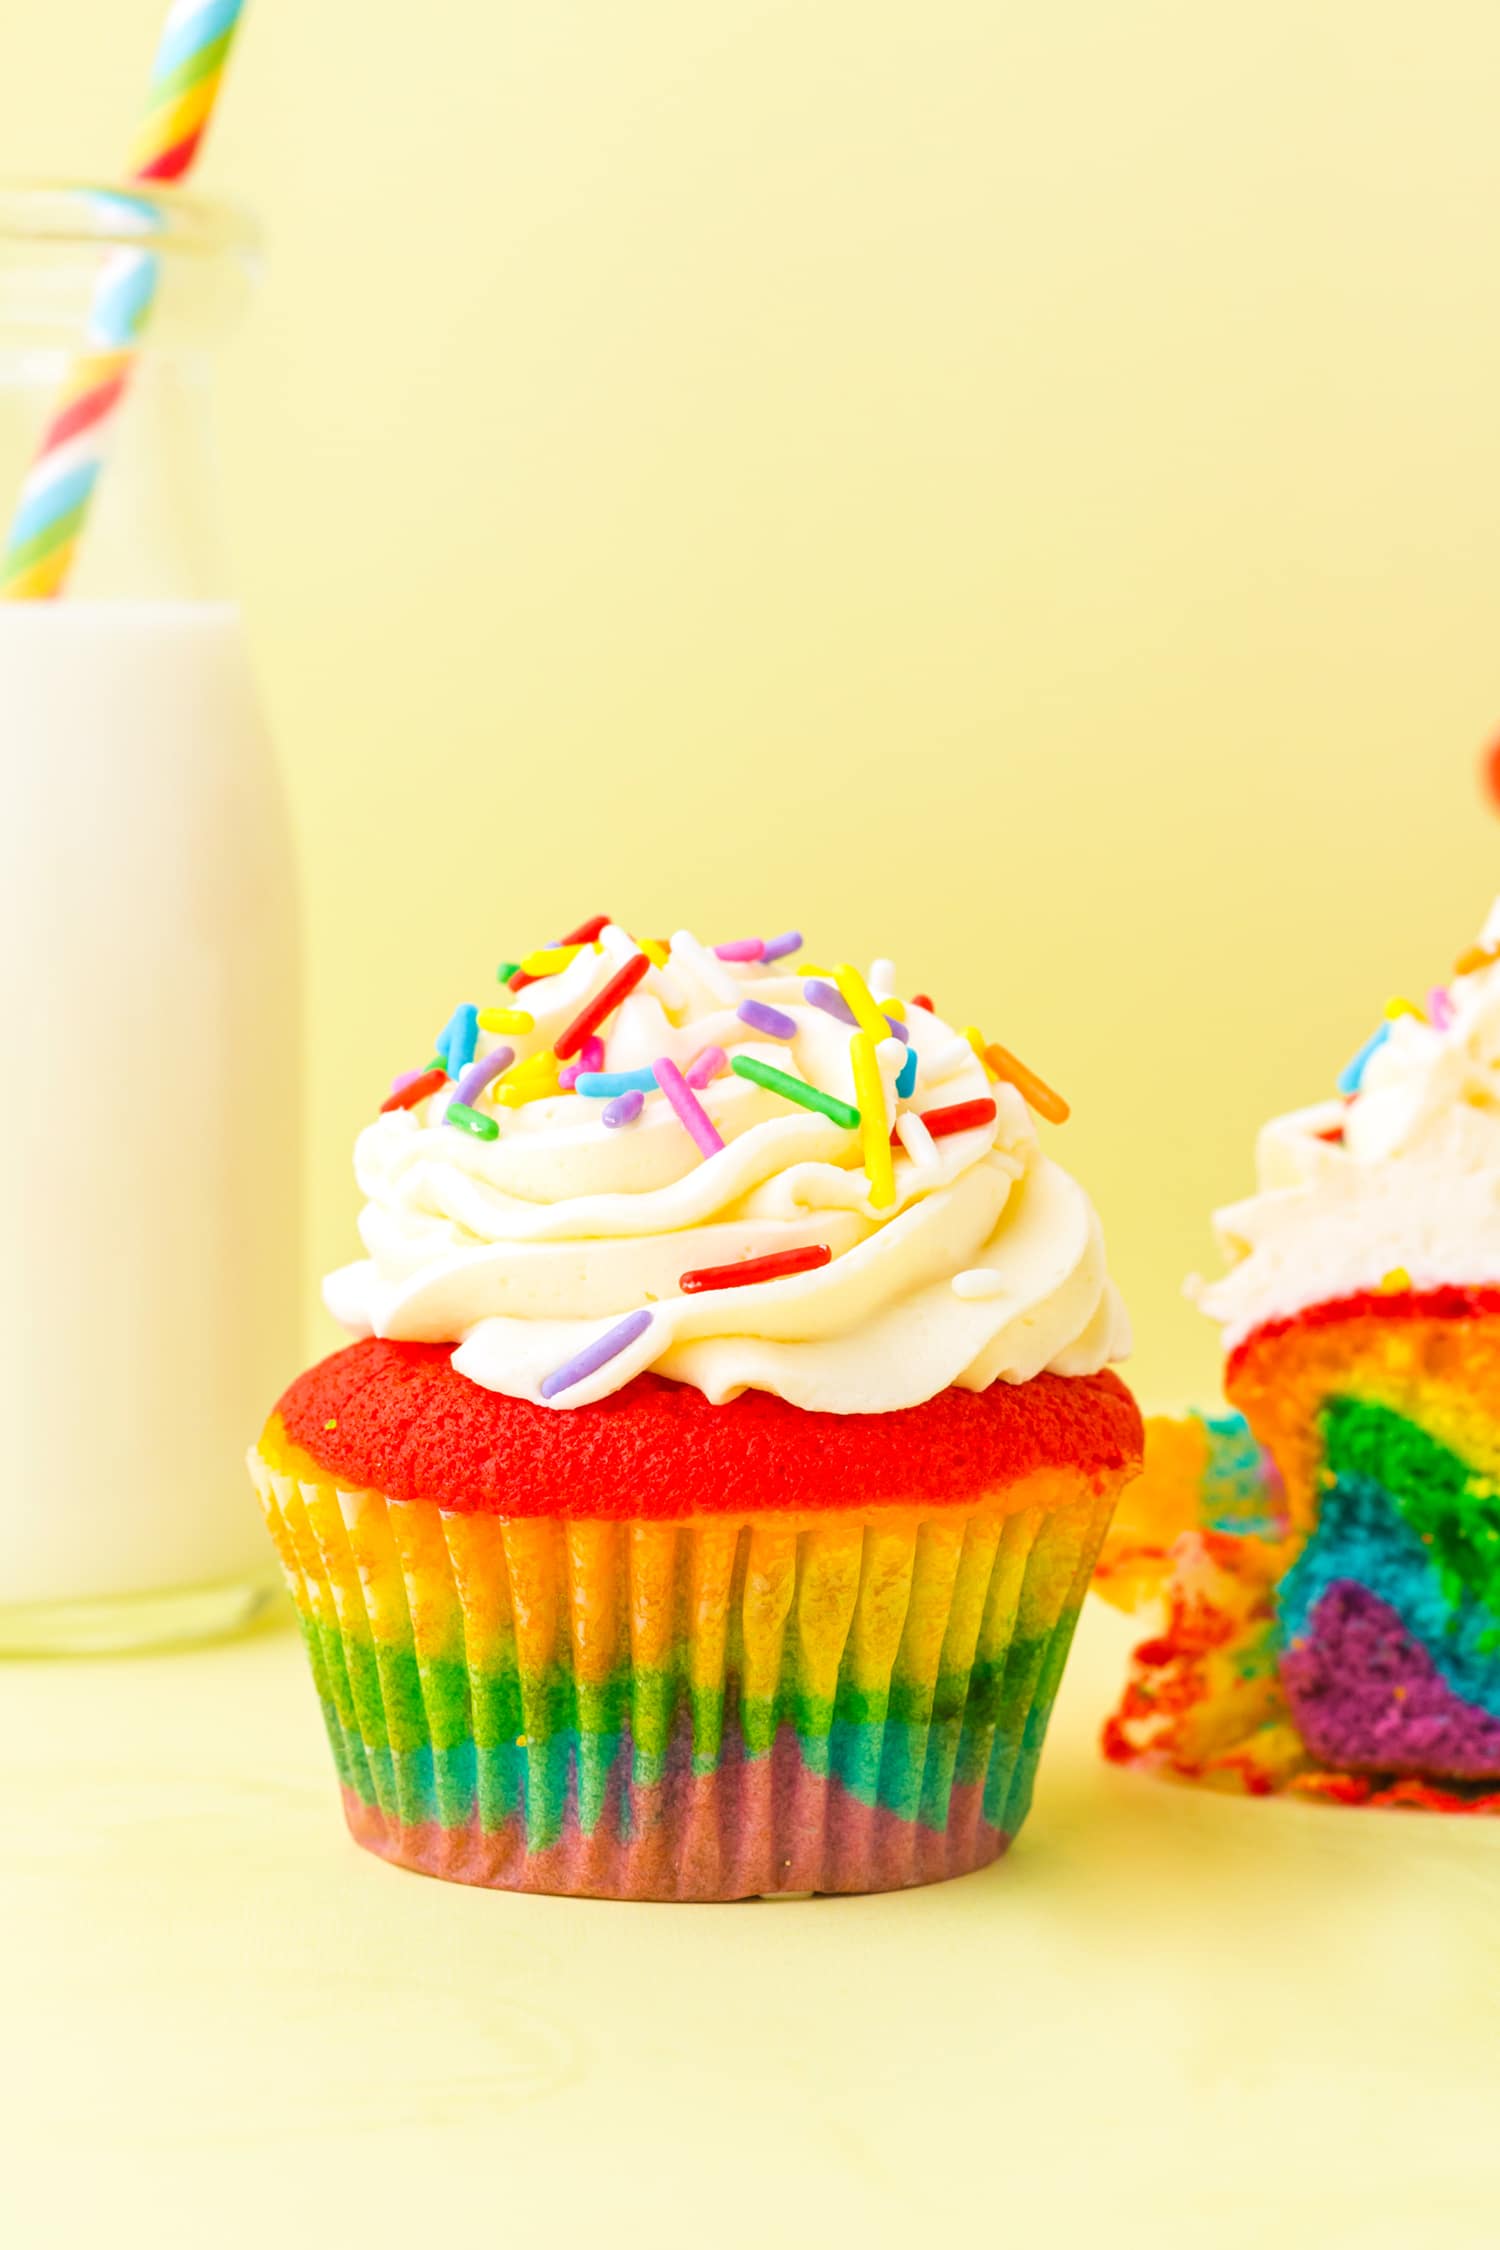 Rainbow Cupcake with sprinkles on a yellow background